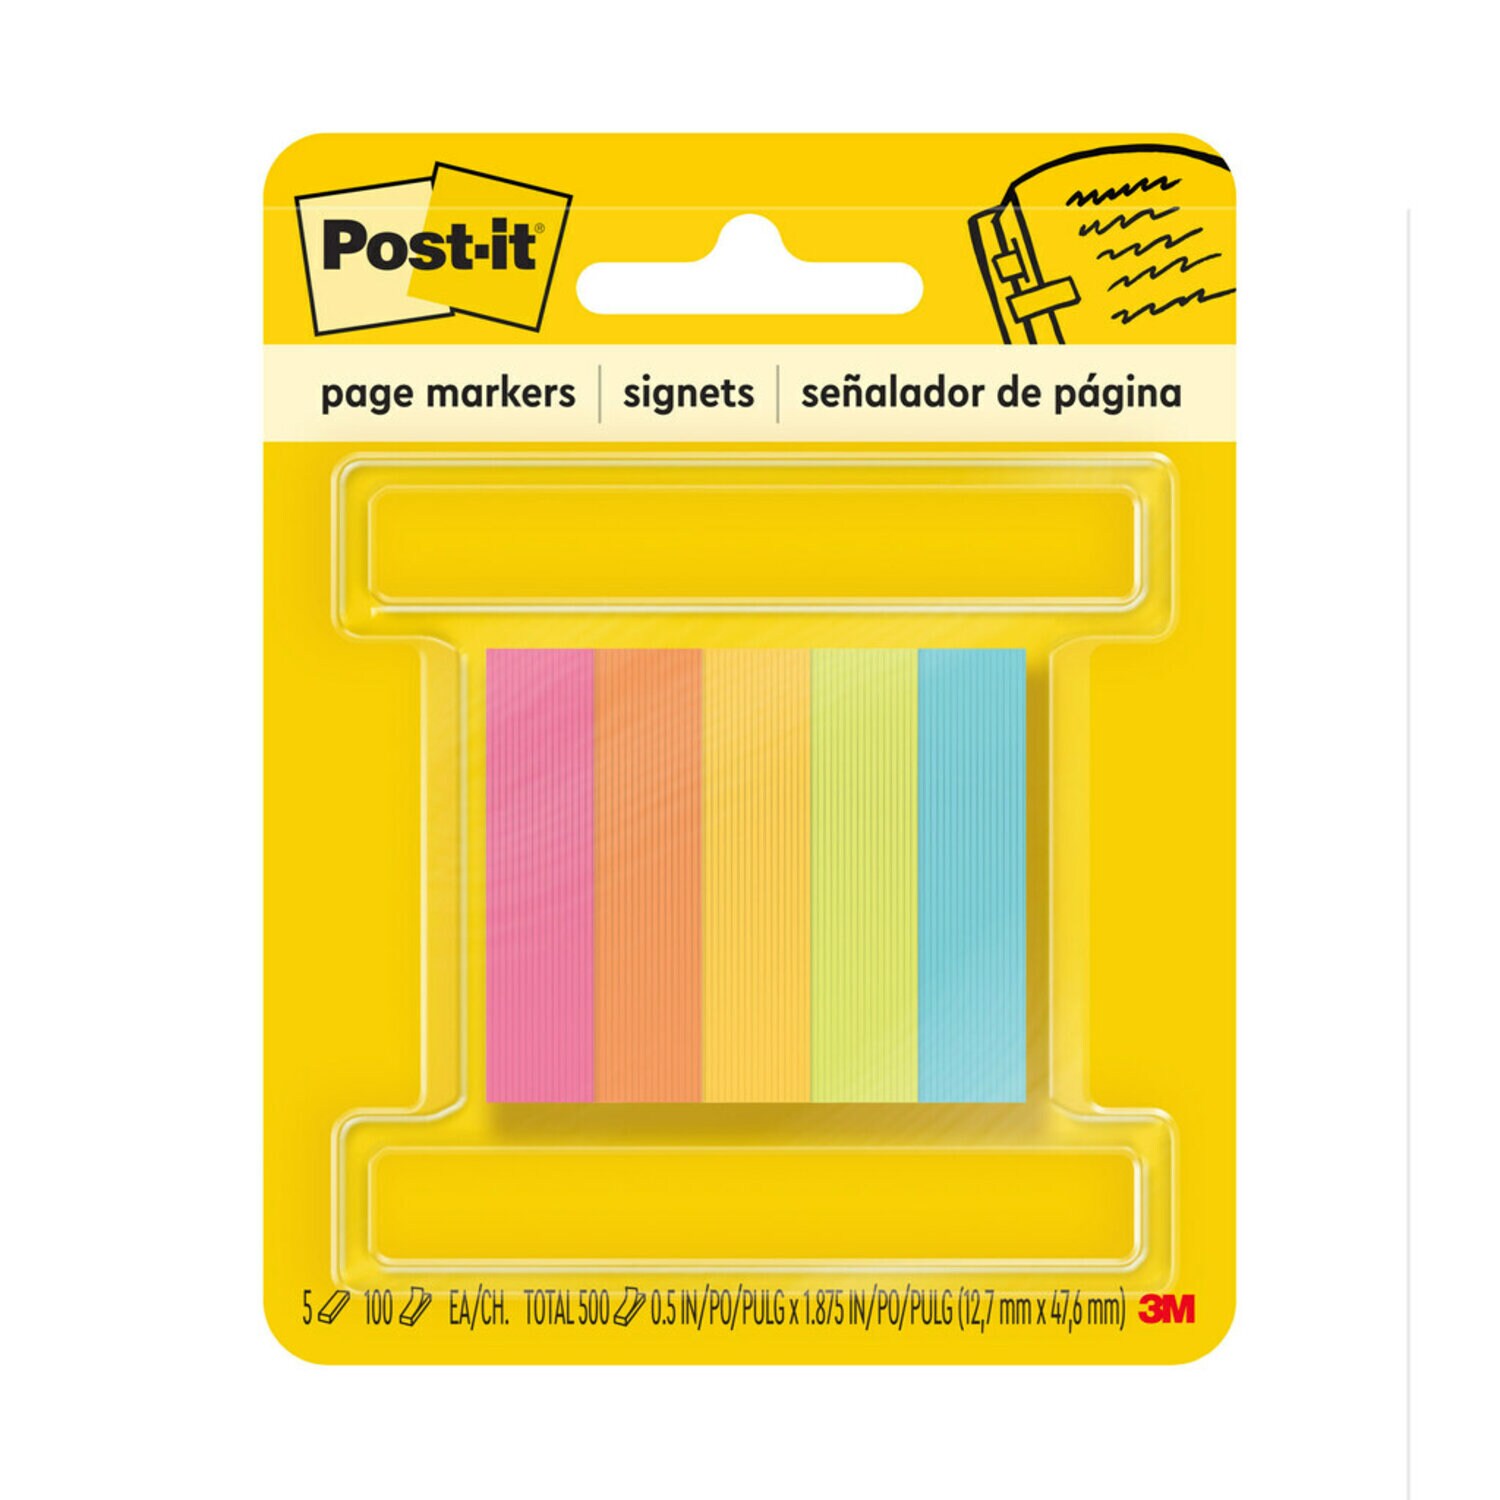 7100035786 - Post-it Page Marker 670-5AN, 1/2 in x 1 7/8 in (12,7 mm x 47,6 mm)
Assorted Colors